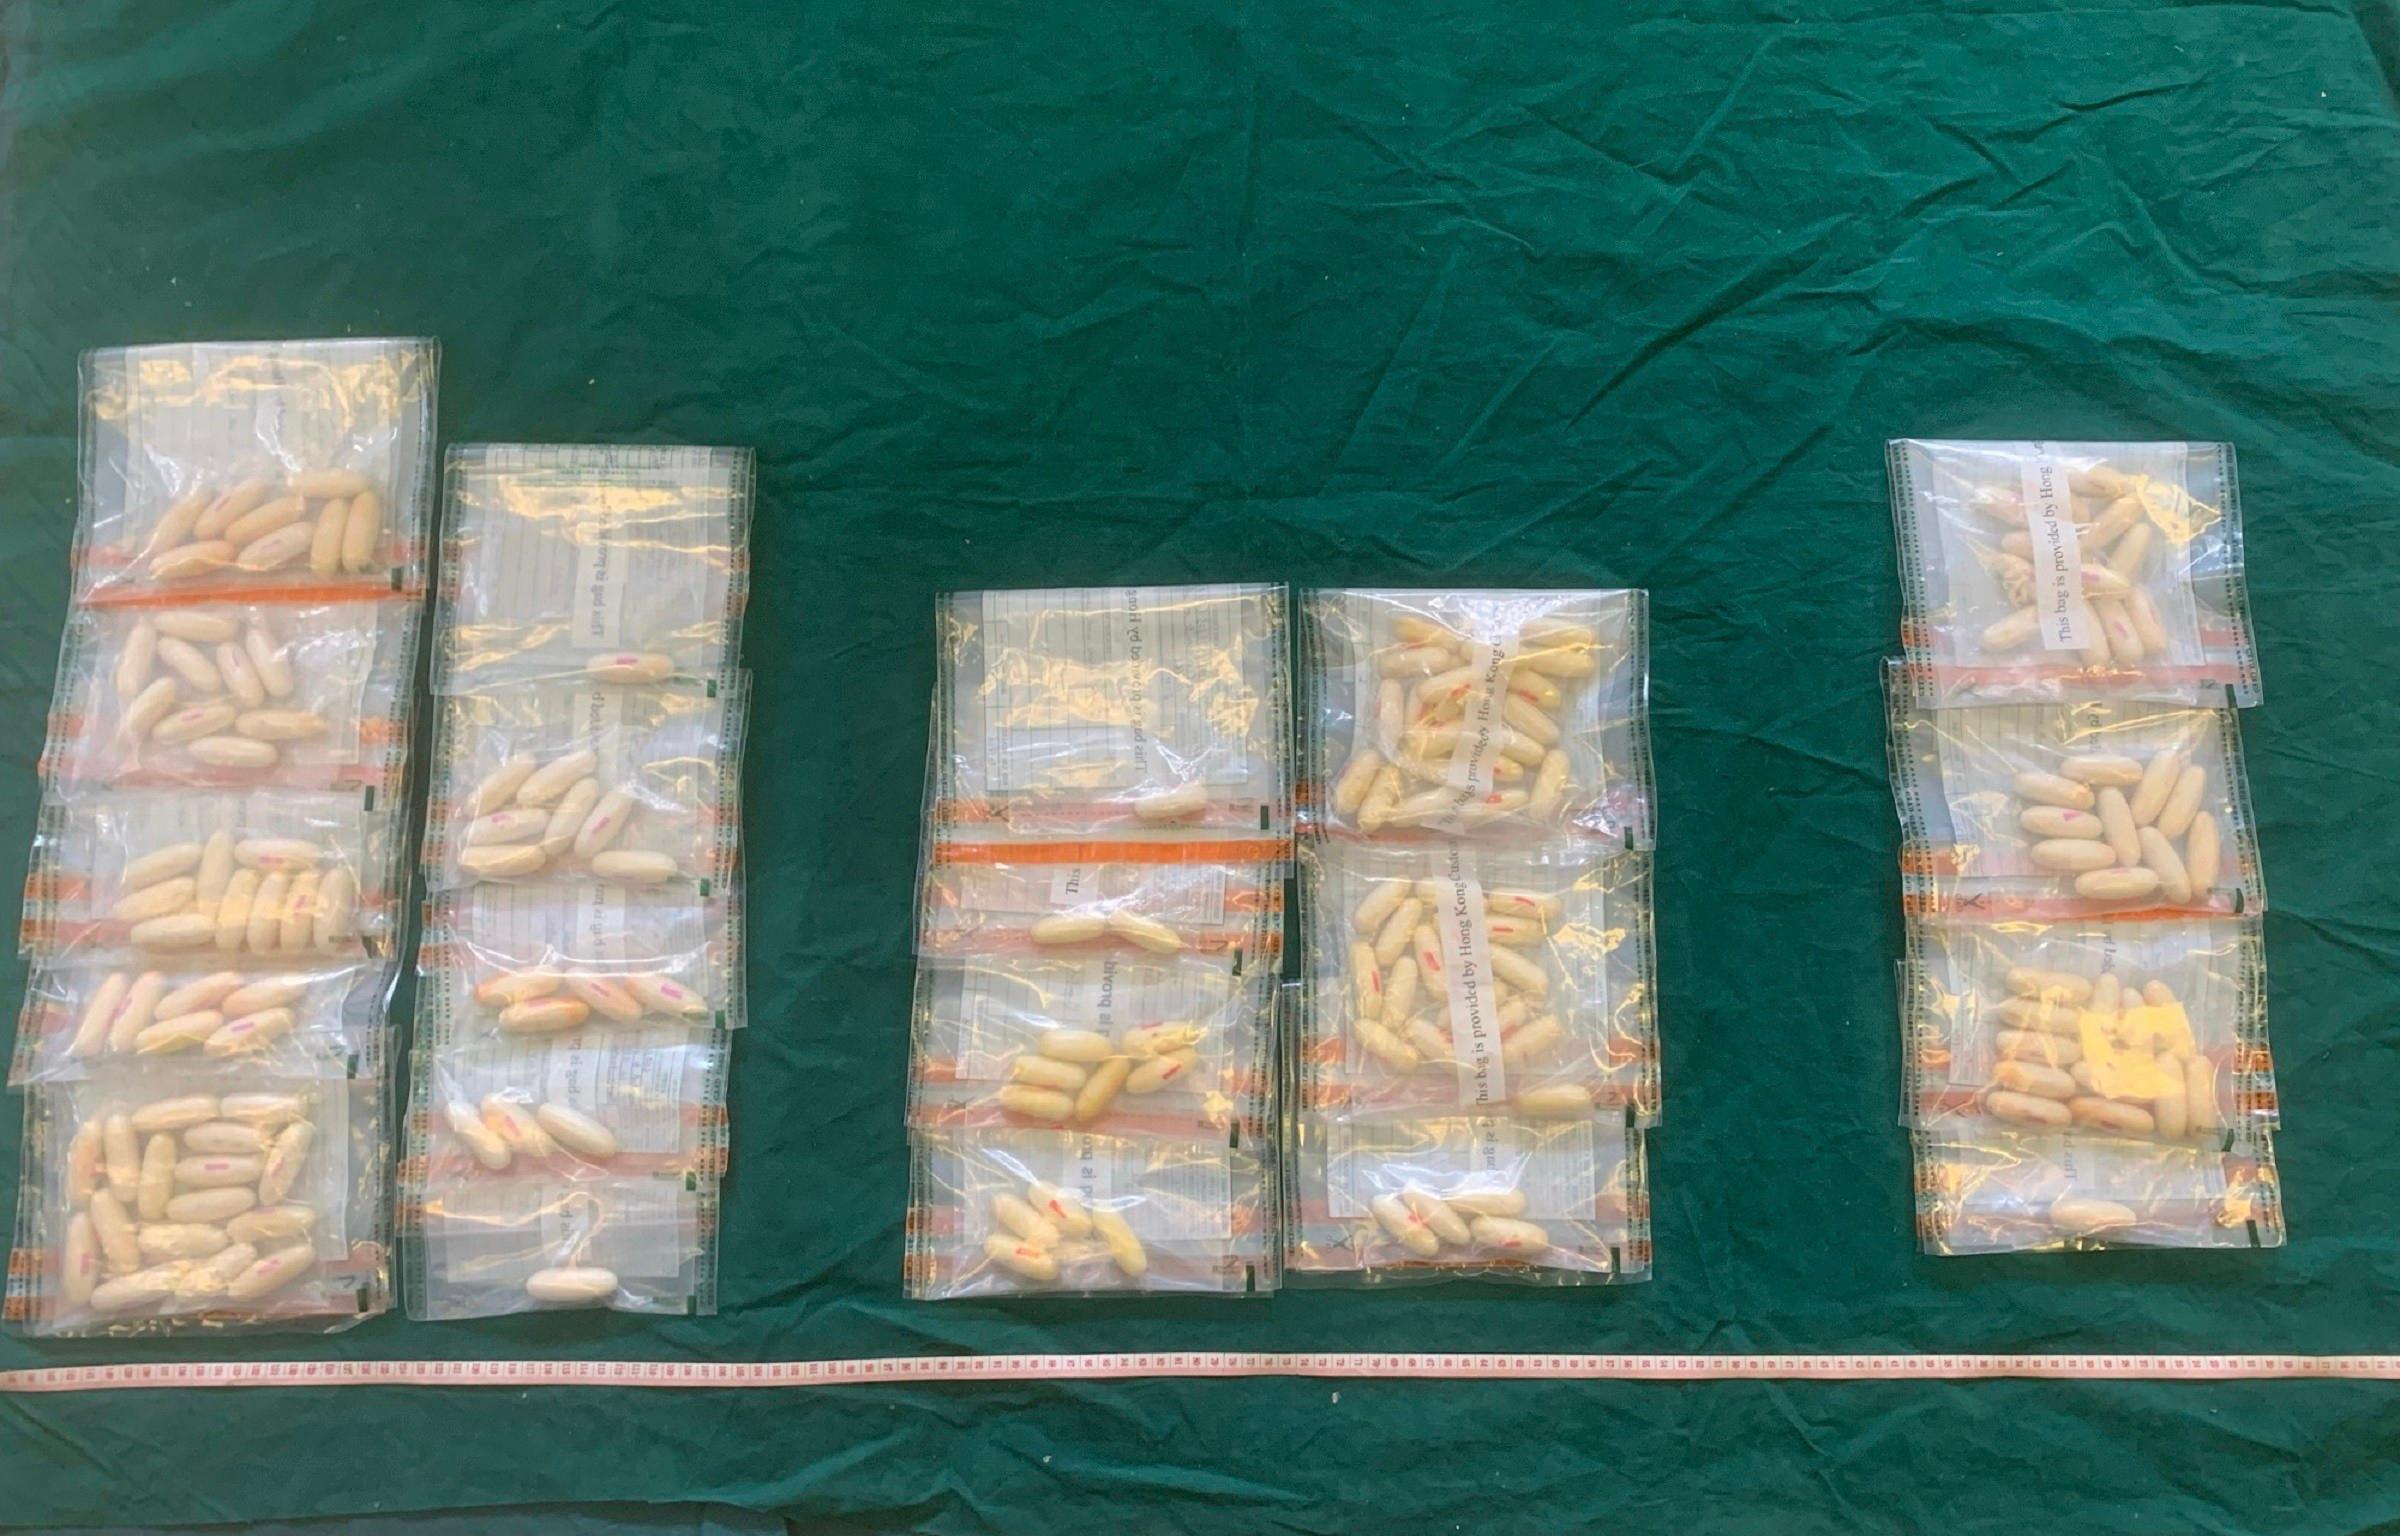 Hong Kong Customs detected a dangerous drugs internal concealment case involving three incoming passengers at Hong Kong International Airport and seized about 1.6 kilograms of suspected cocaine with an estimated market value of about $1.3 million over the past two days (May 8 and 9). Photo shows the suspected cocaine seized.